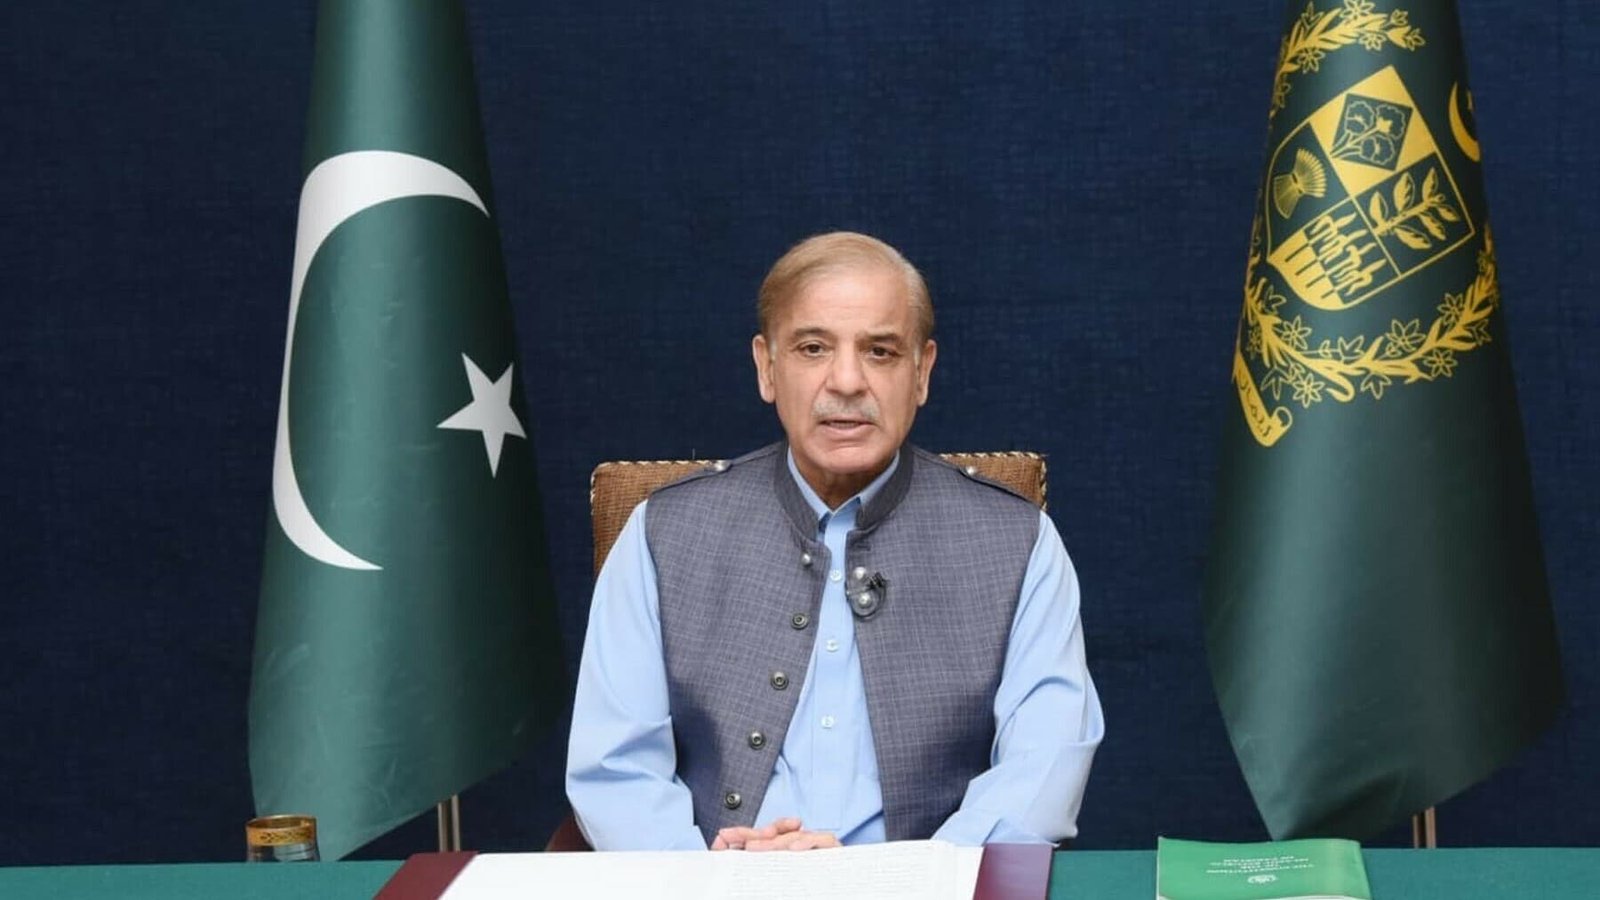 PM Shehbaz Sharif Address to nation. This was his first.